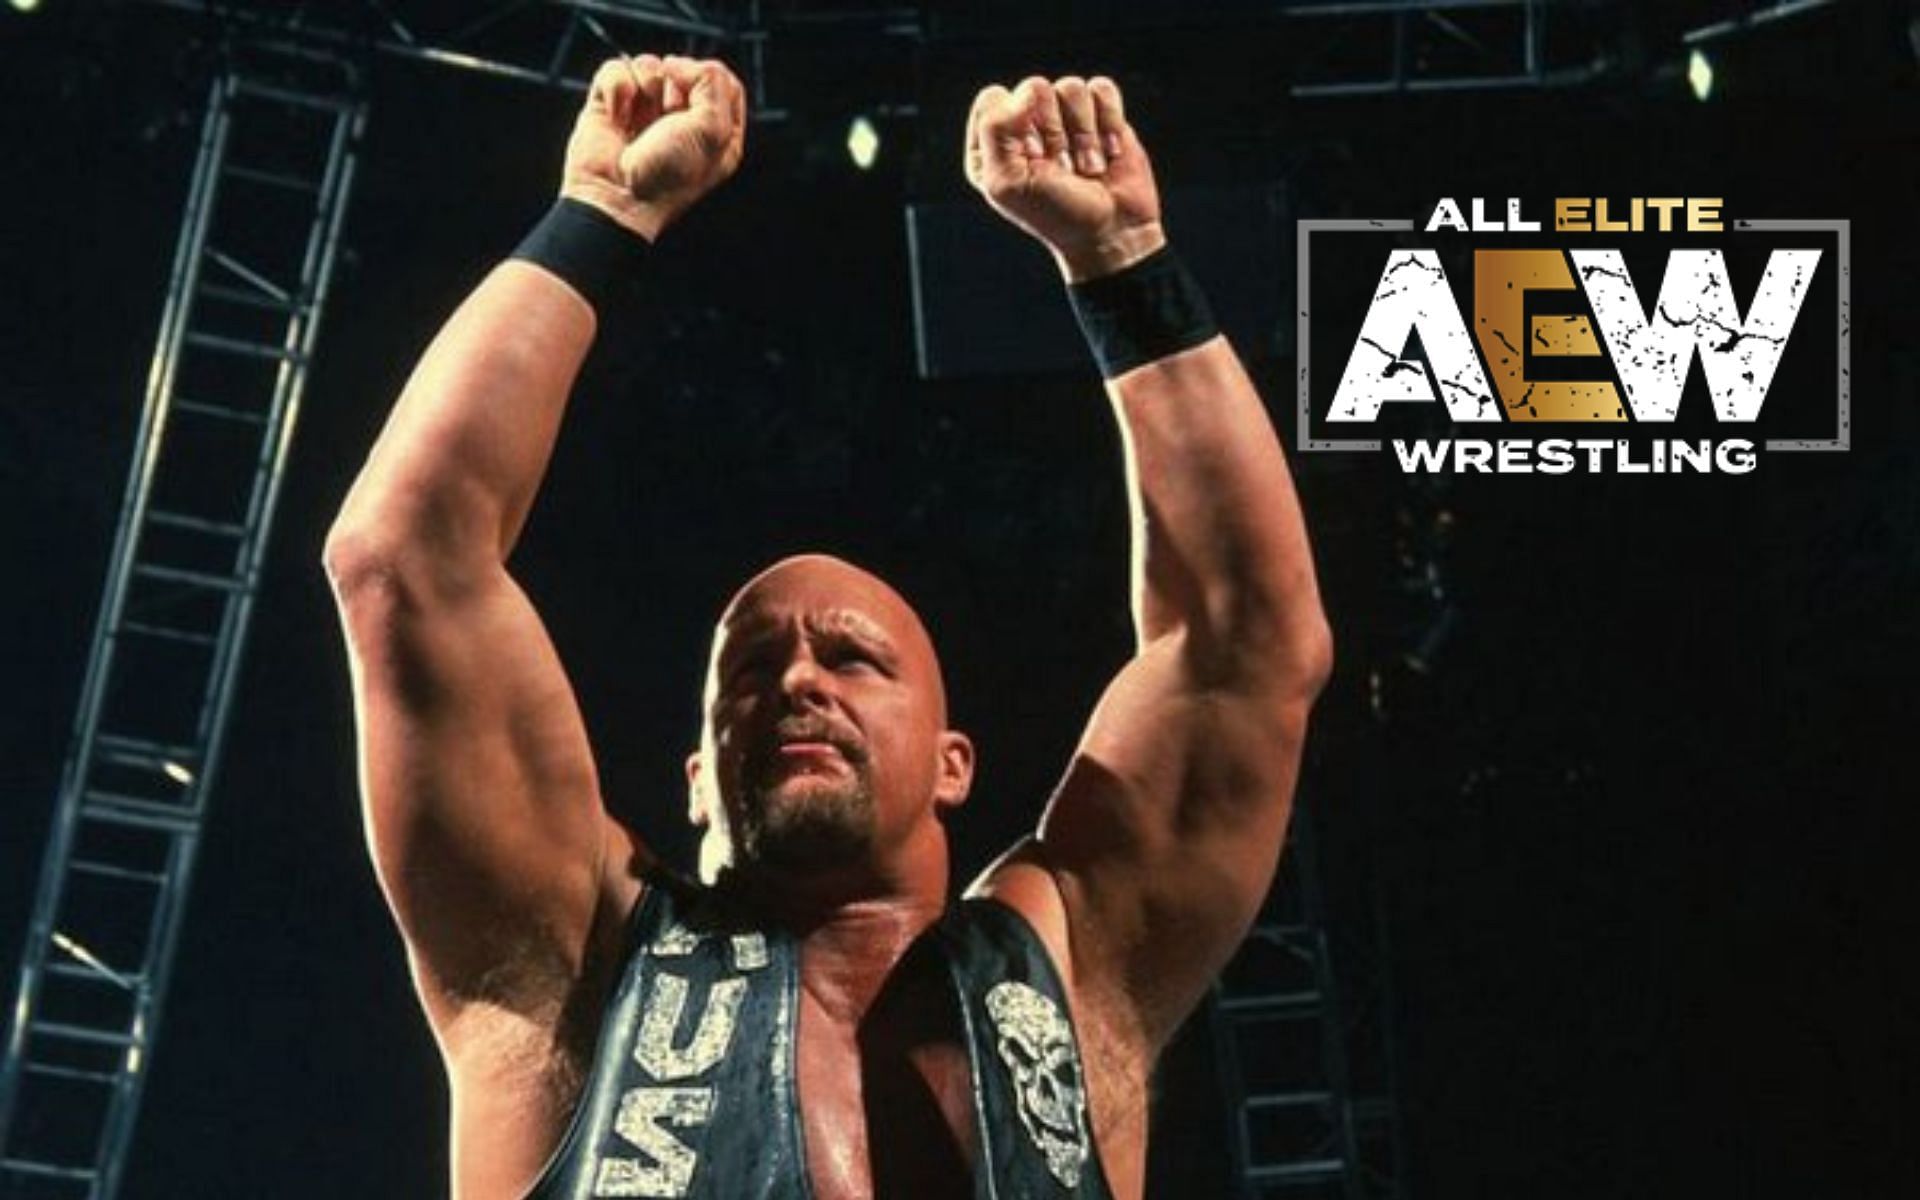 Stone Cold Steve Austin has had an expansive career with WWE